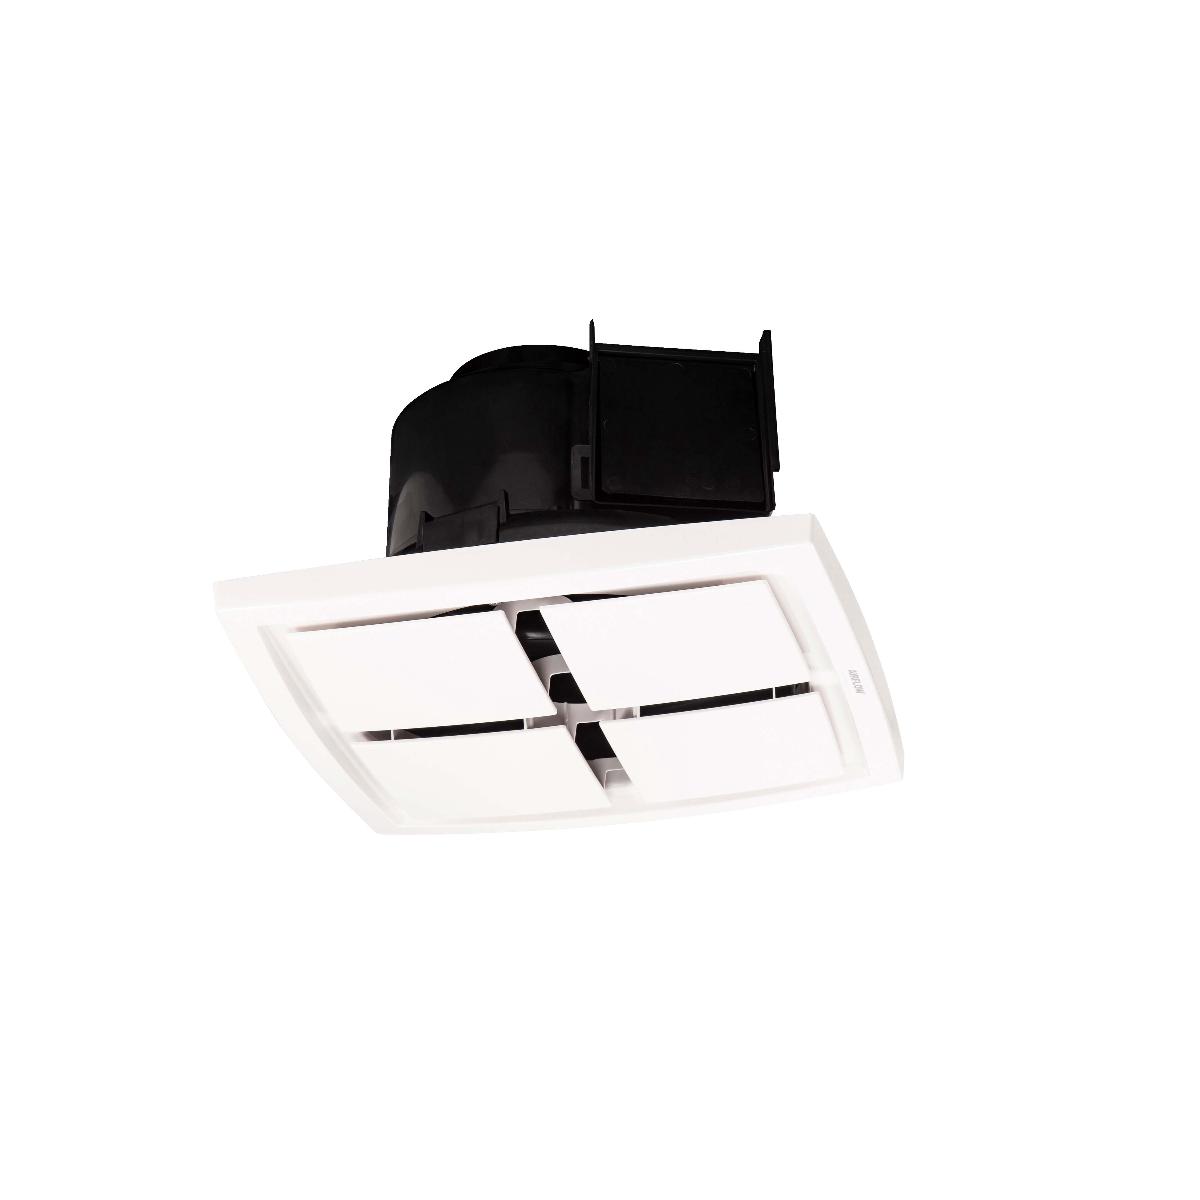 EXHAUST FAN KIT CEILING DUCTED 150MM 35W